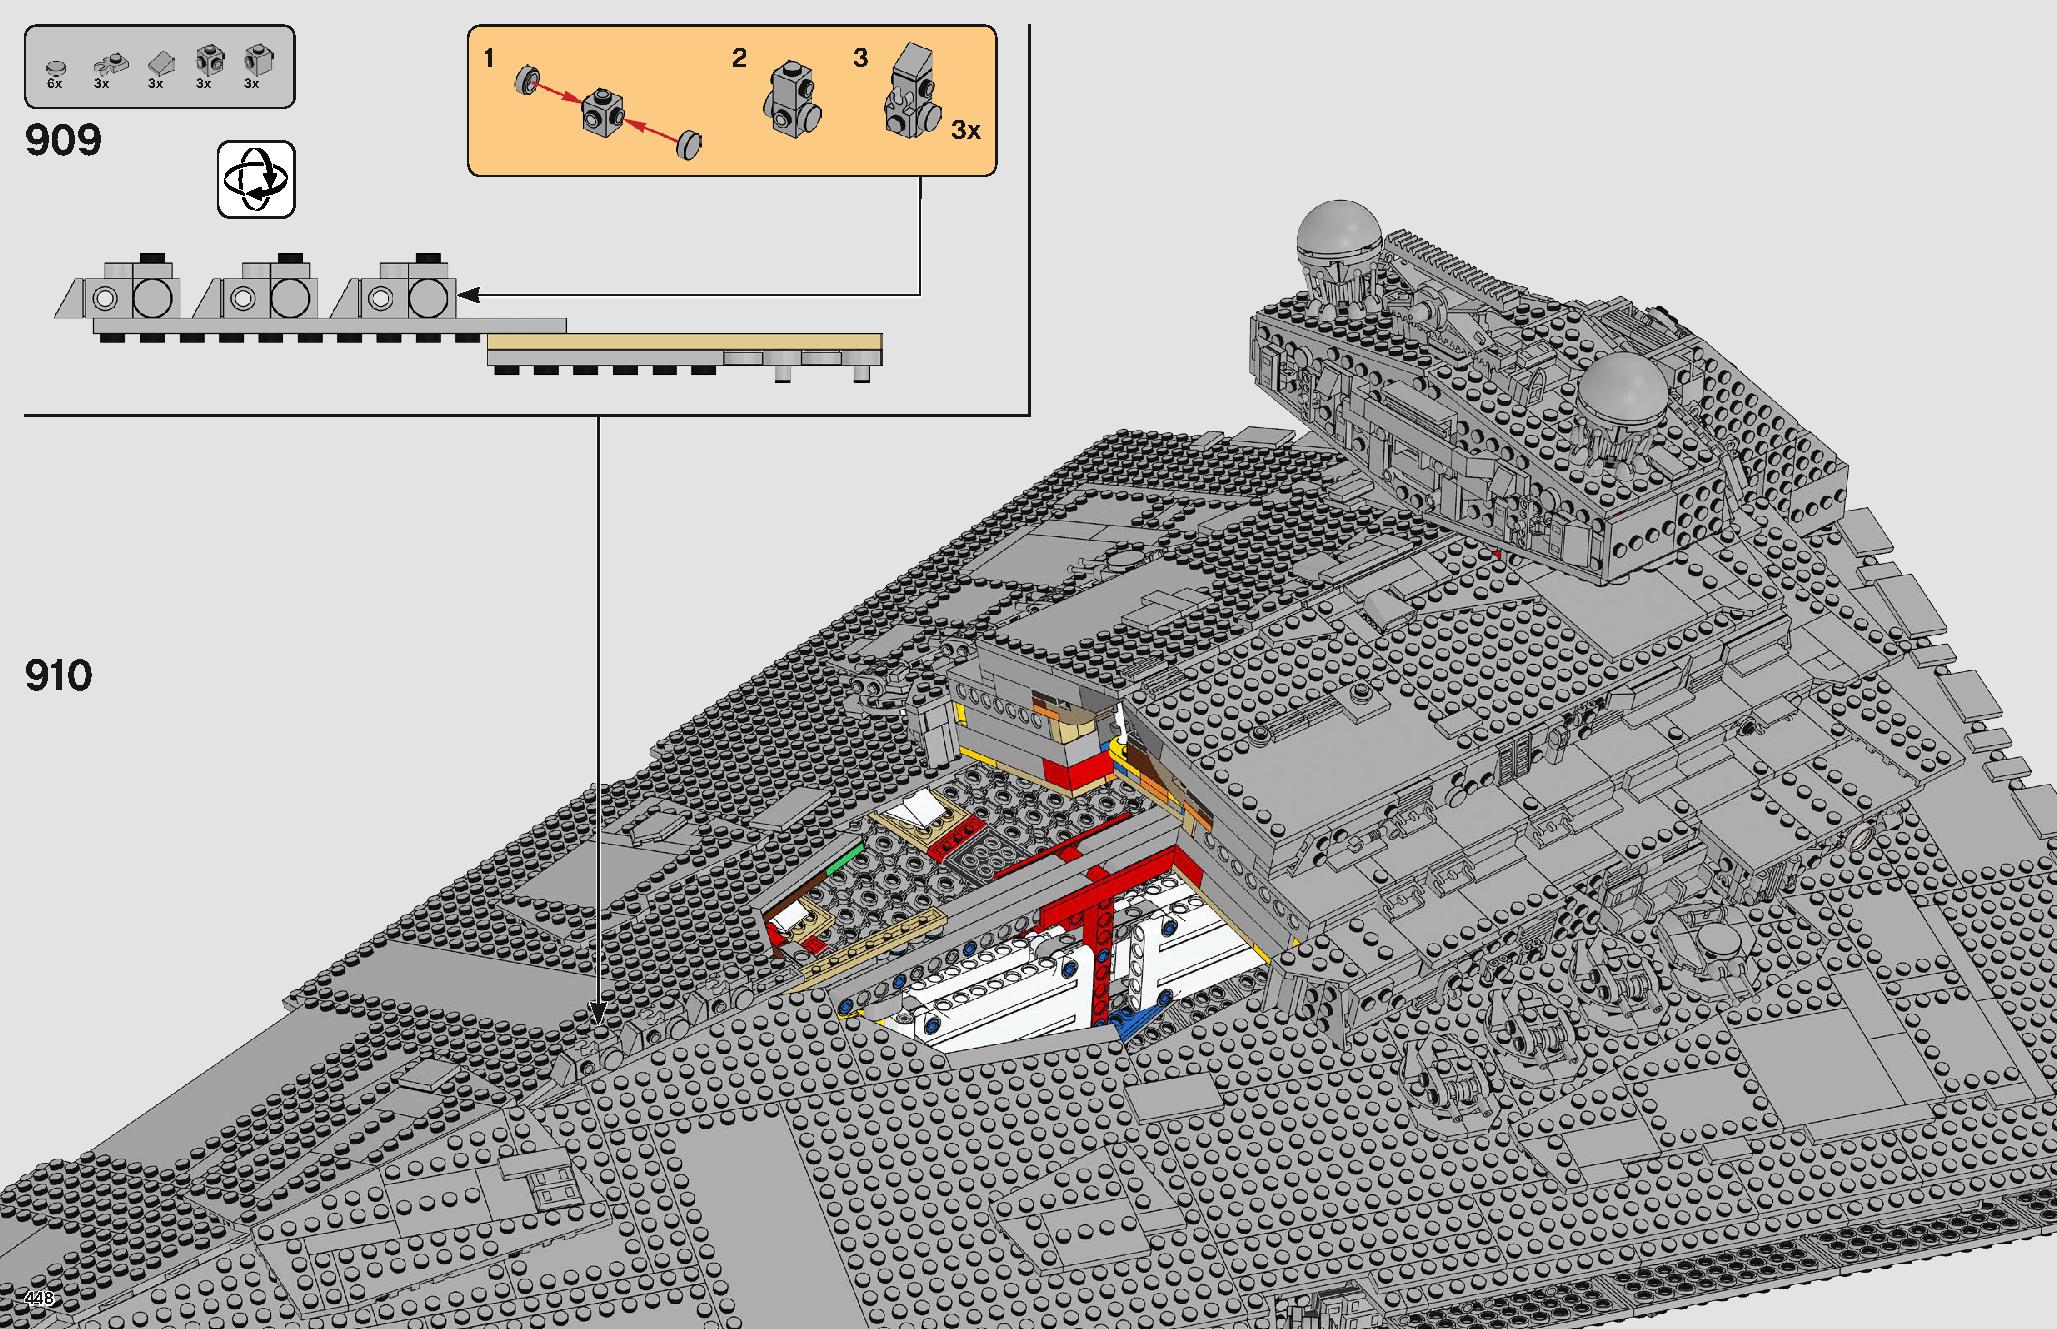 Imperial Star Destroyer 75252 レゴの商品情報 レゴの説明書・組立方法 448 page